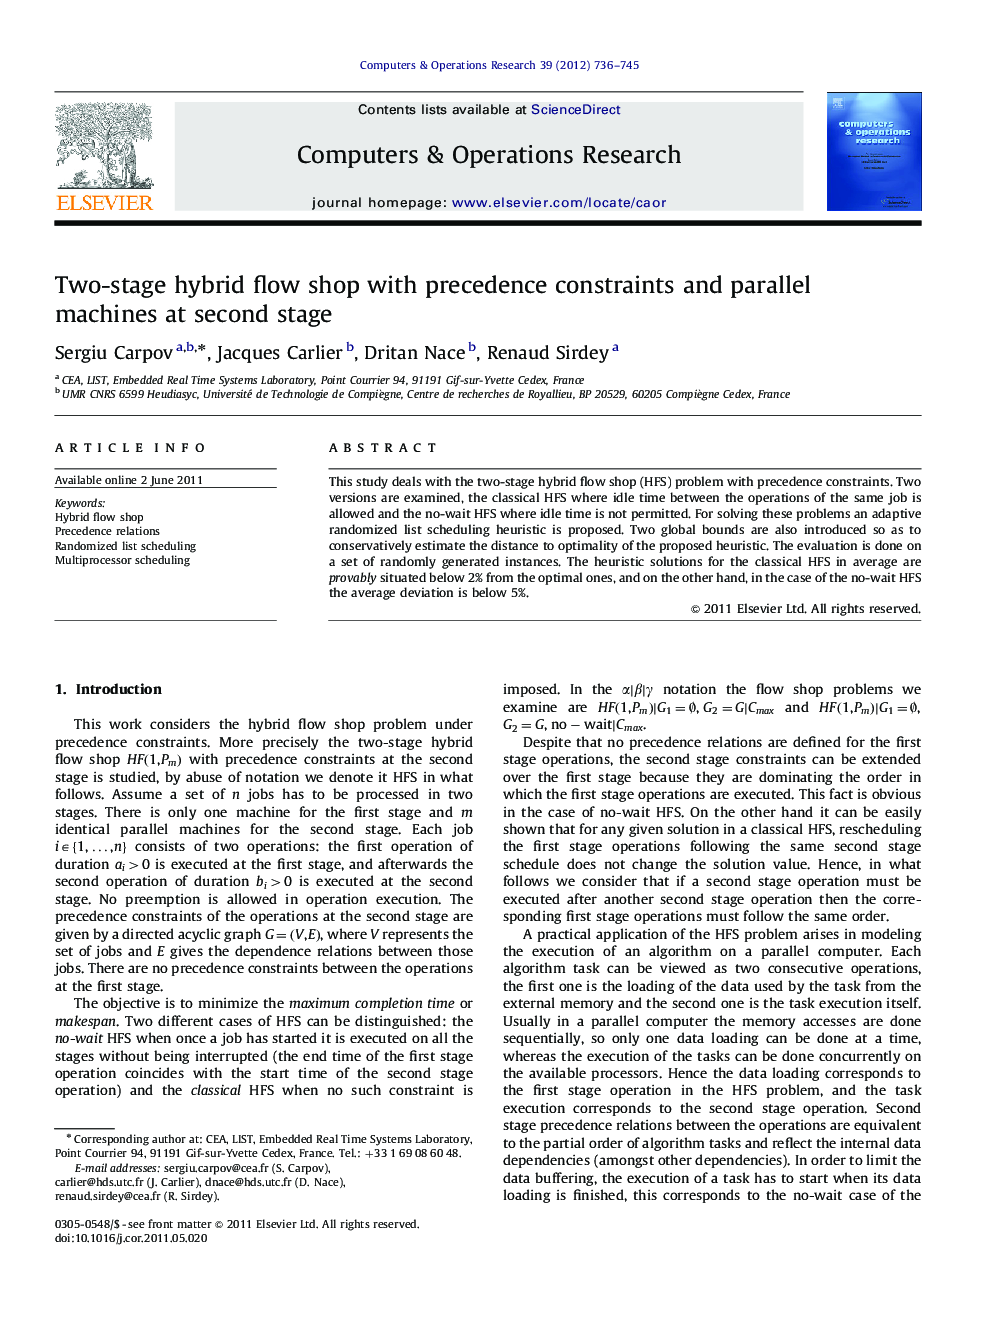 Two-stage hybrid flow shop with precedence constraints and parallel machines at second stage